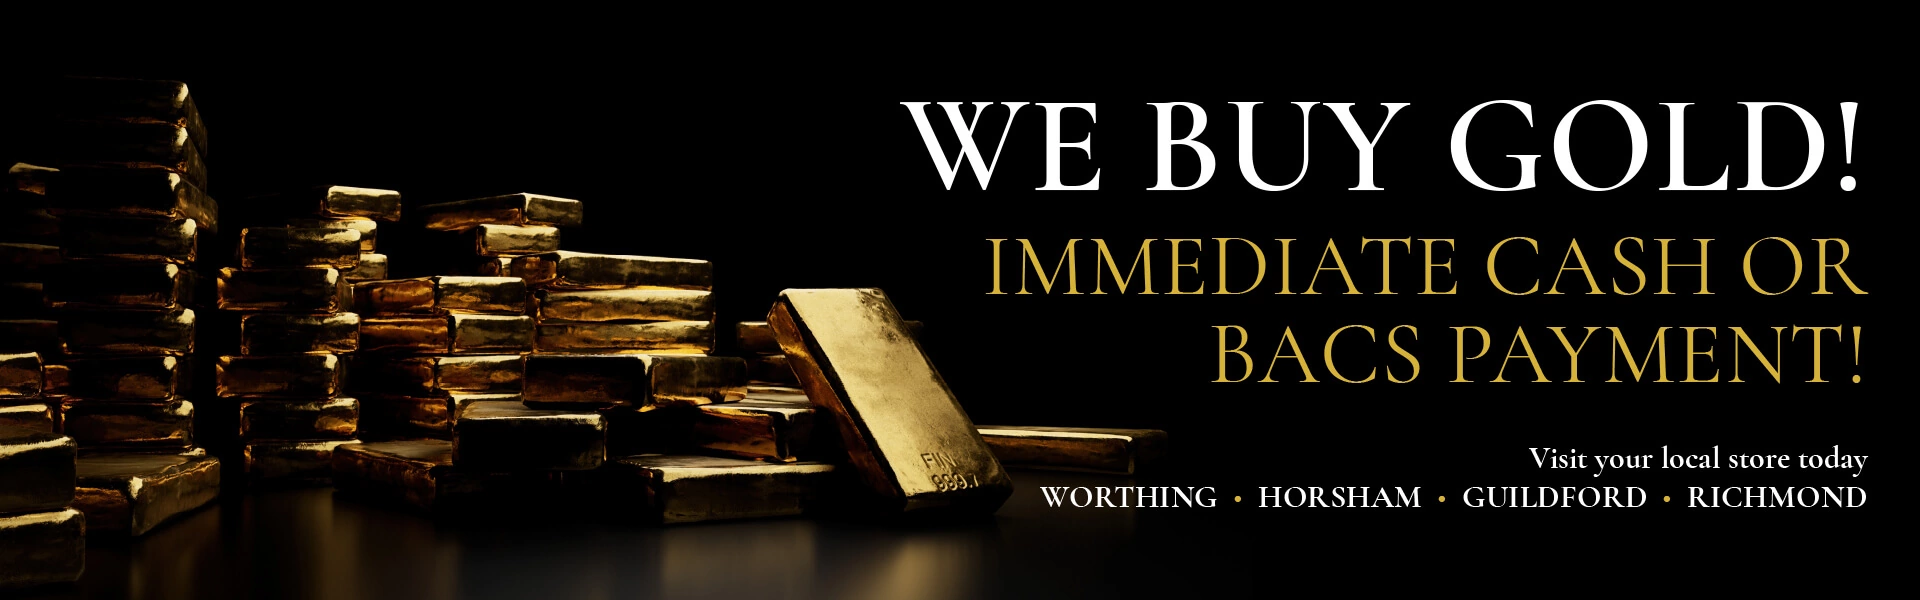 Advertising banner saying 'We Buy Gold' with stacks of gold bars in the background